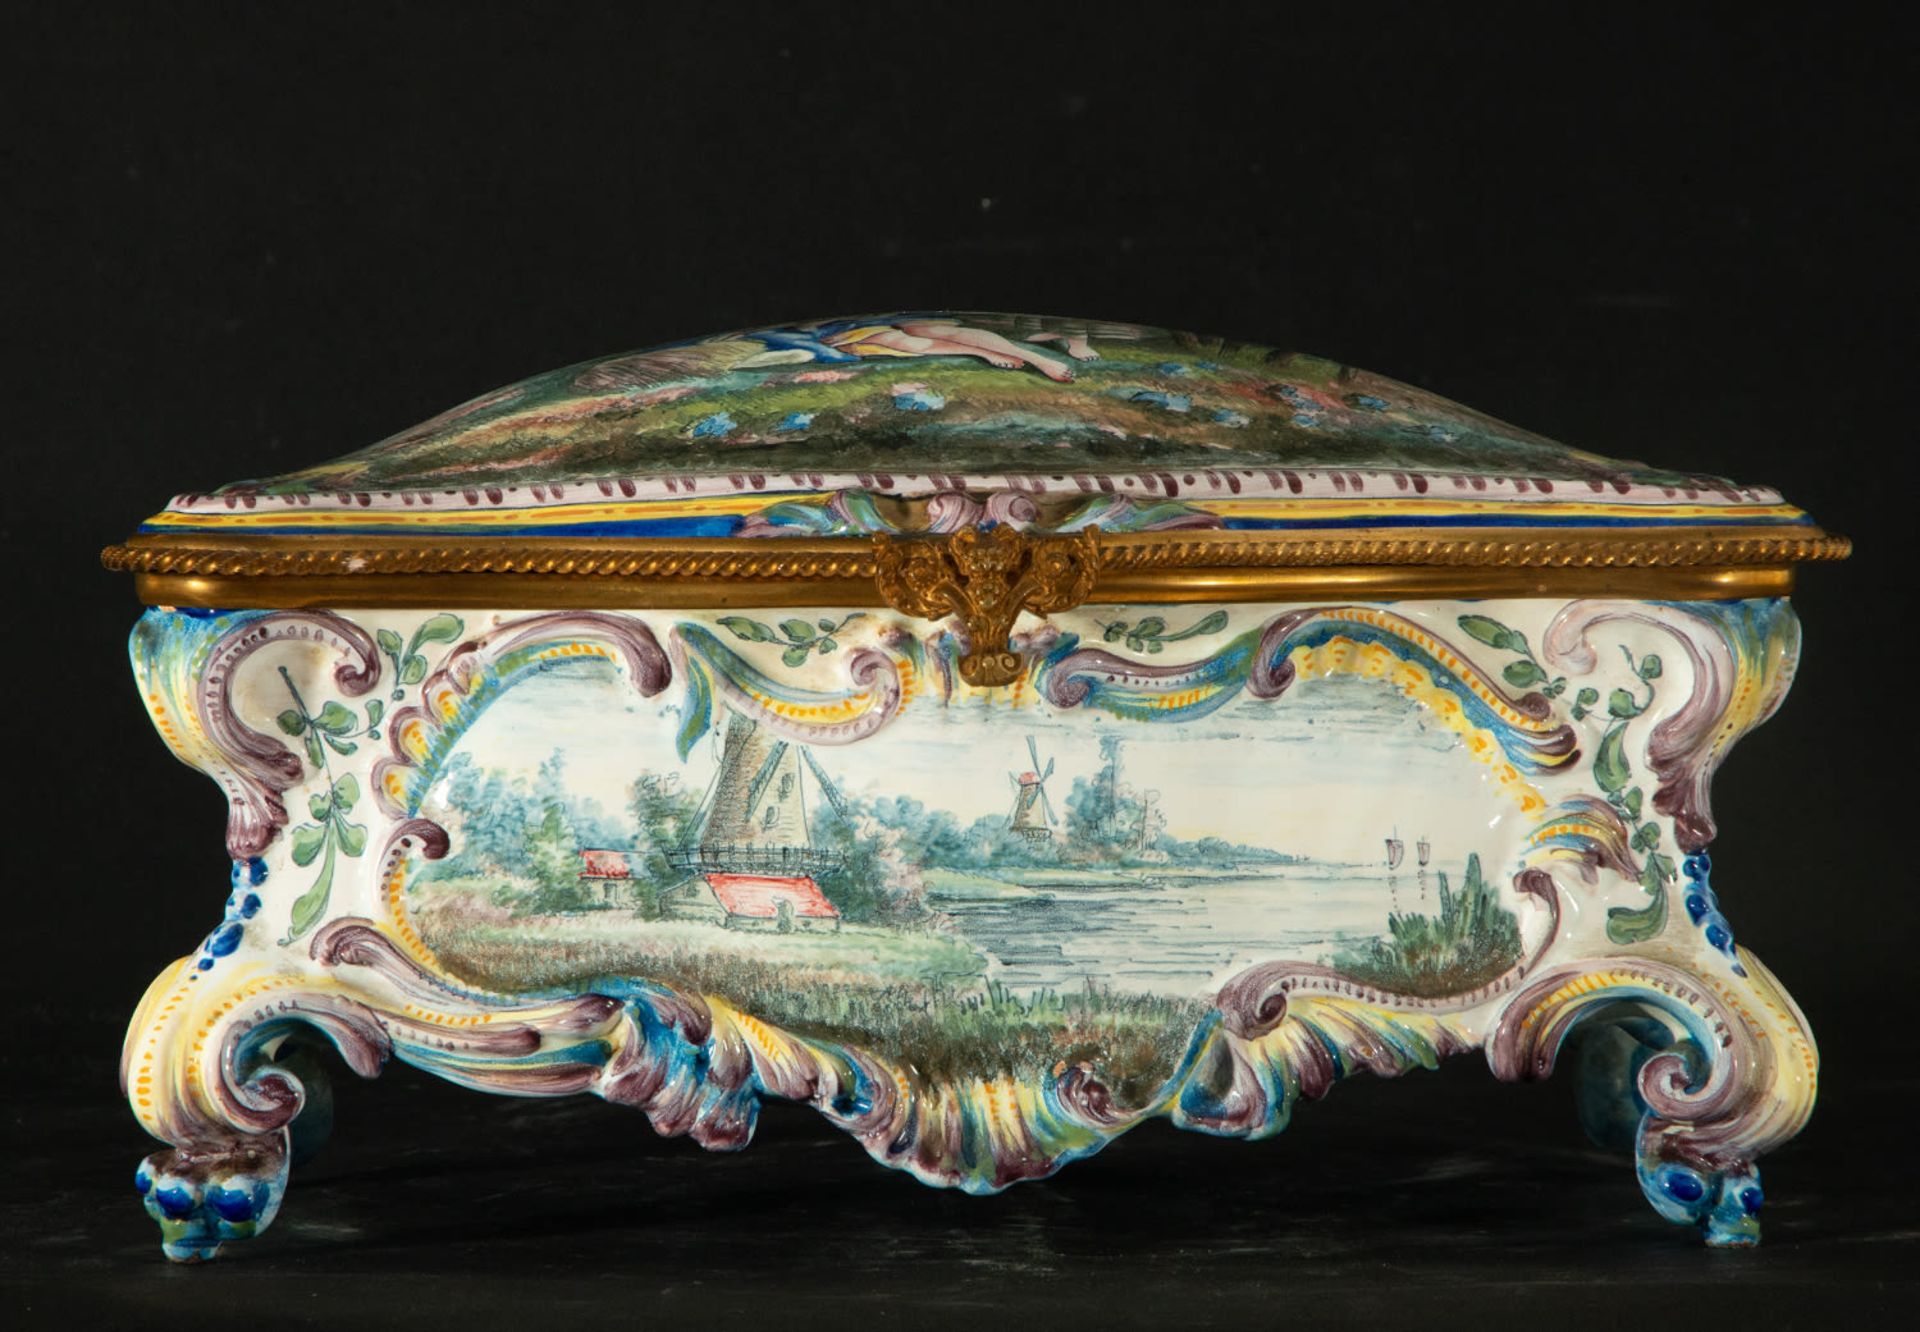 Magnificent Marseille porcelain jewelry box with gallant scene, 19th century